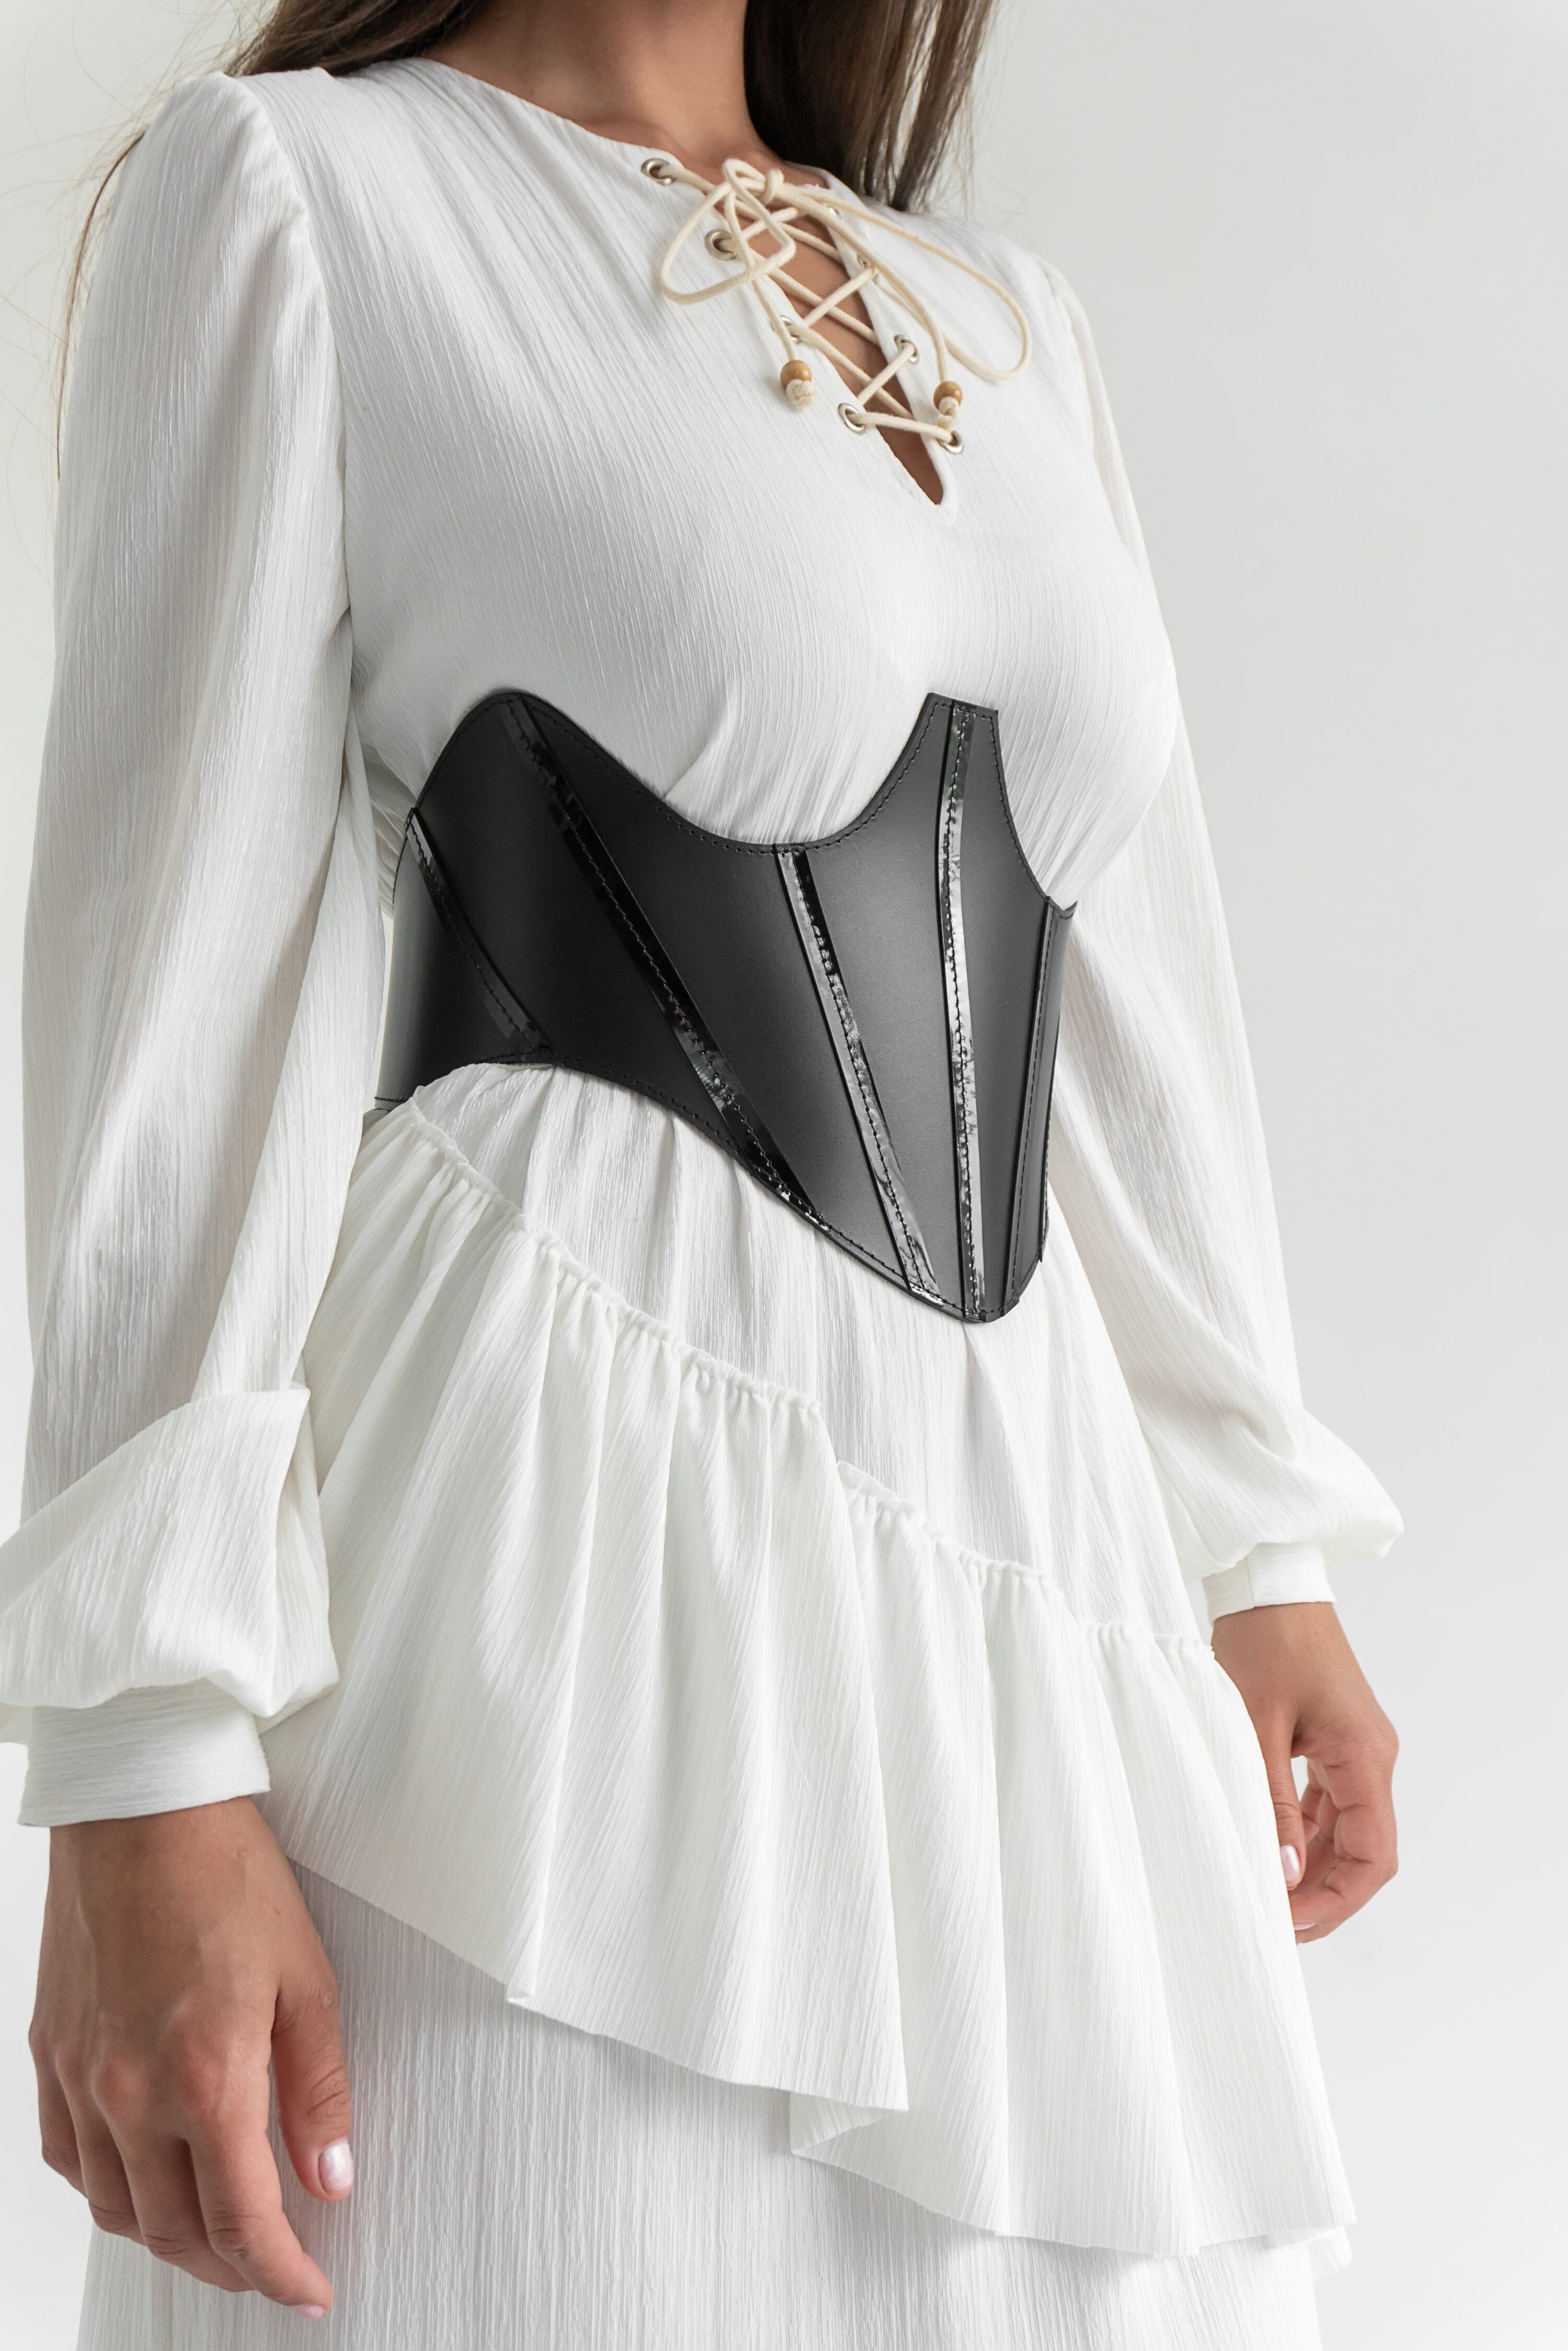 Dominica Corset with Patent (2)